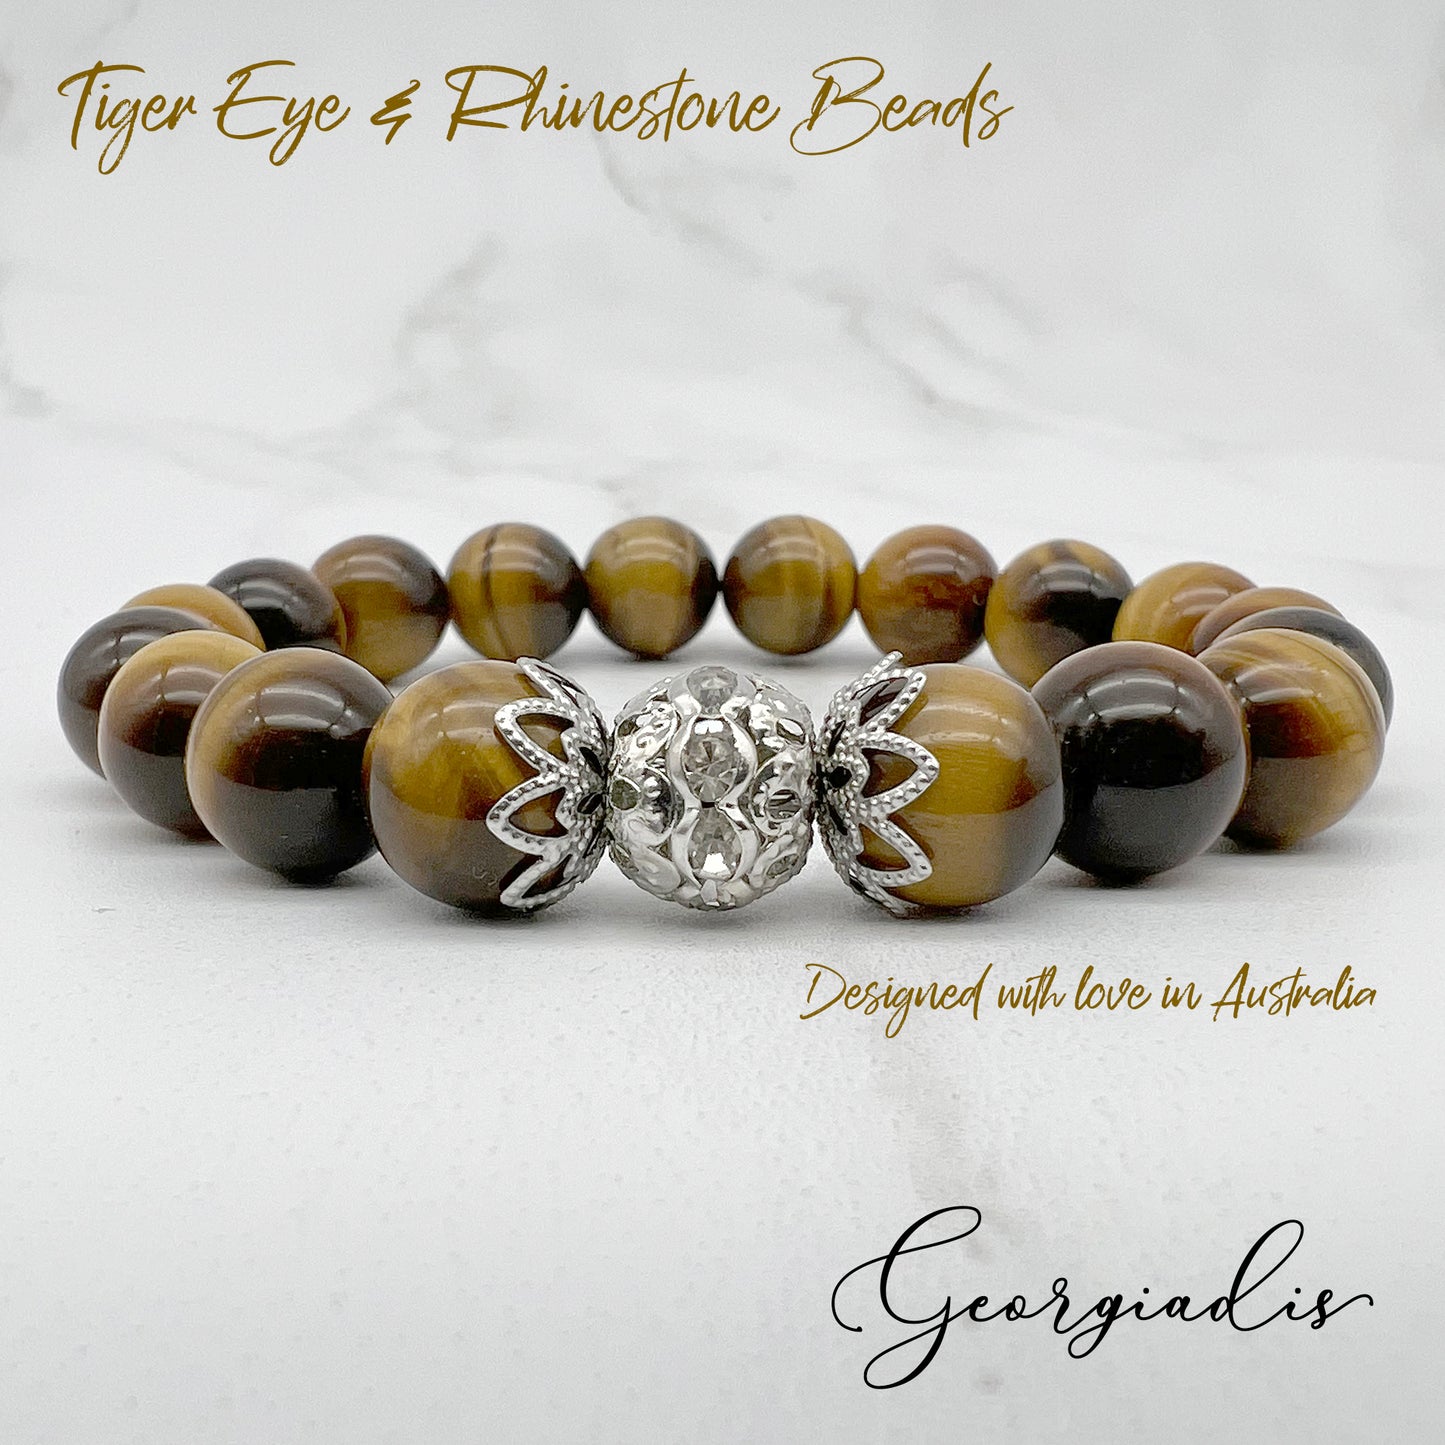 10mm Tiger Eye Natural Genuine Gemstone with Stunning Spacer Bead Inlaid with Rhinestones, Promotes Wealth, Determination, Luck, January Birthstone